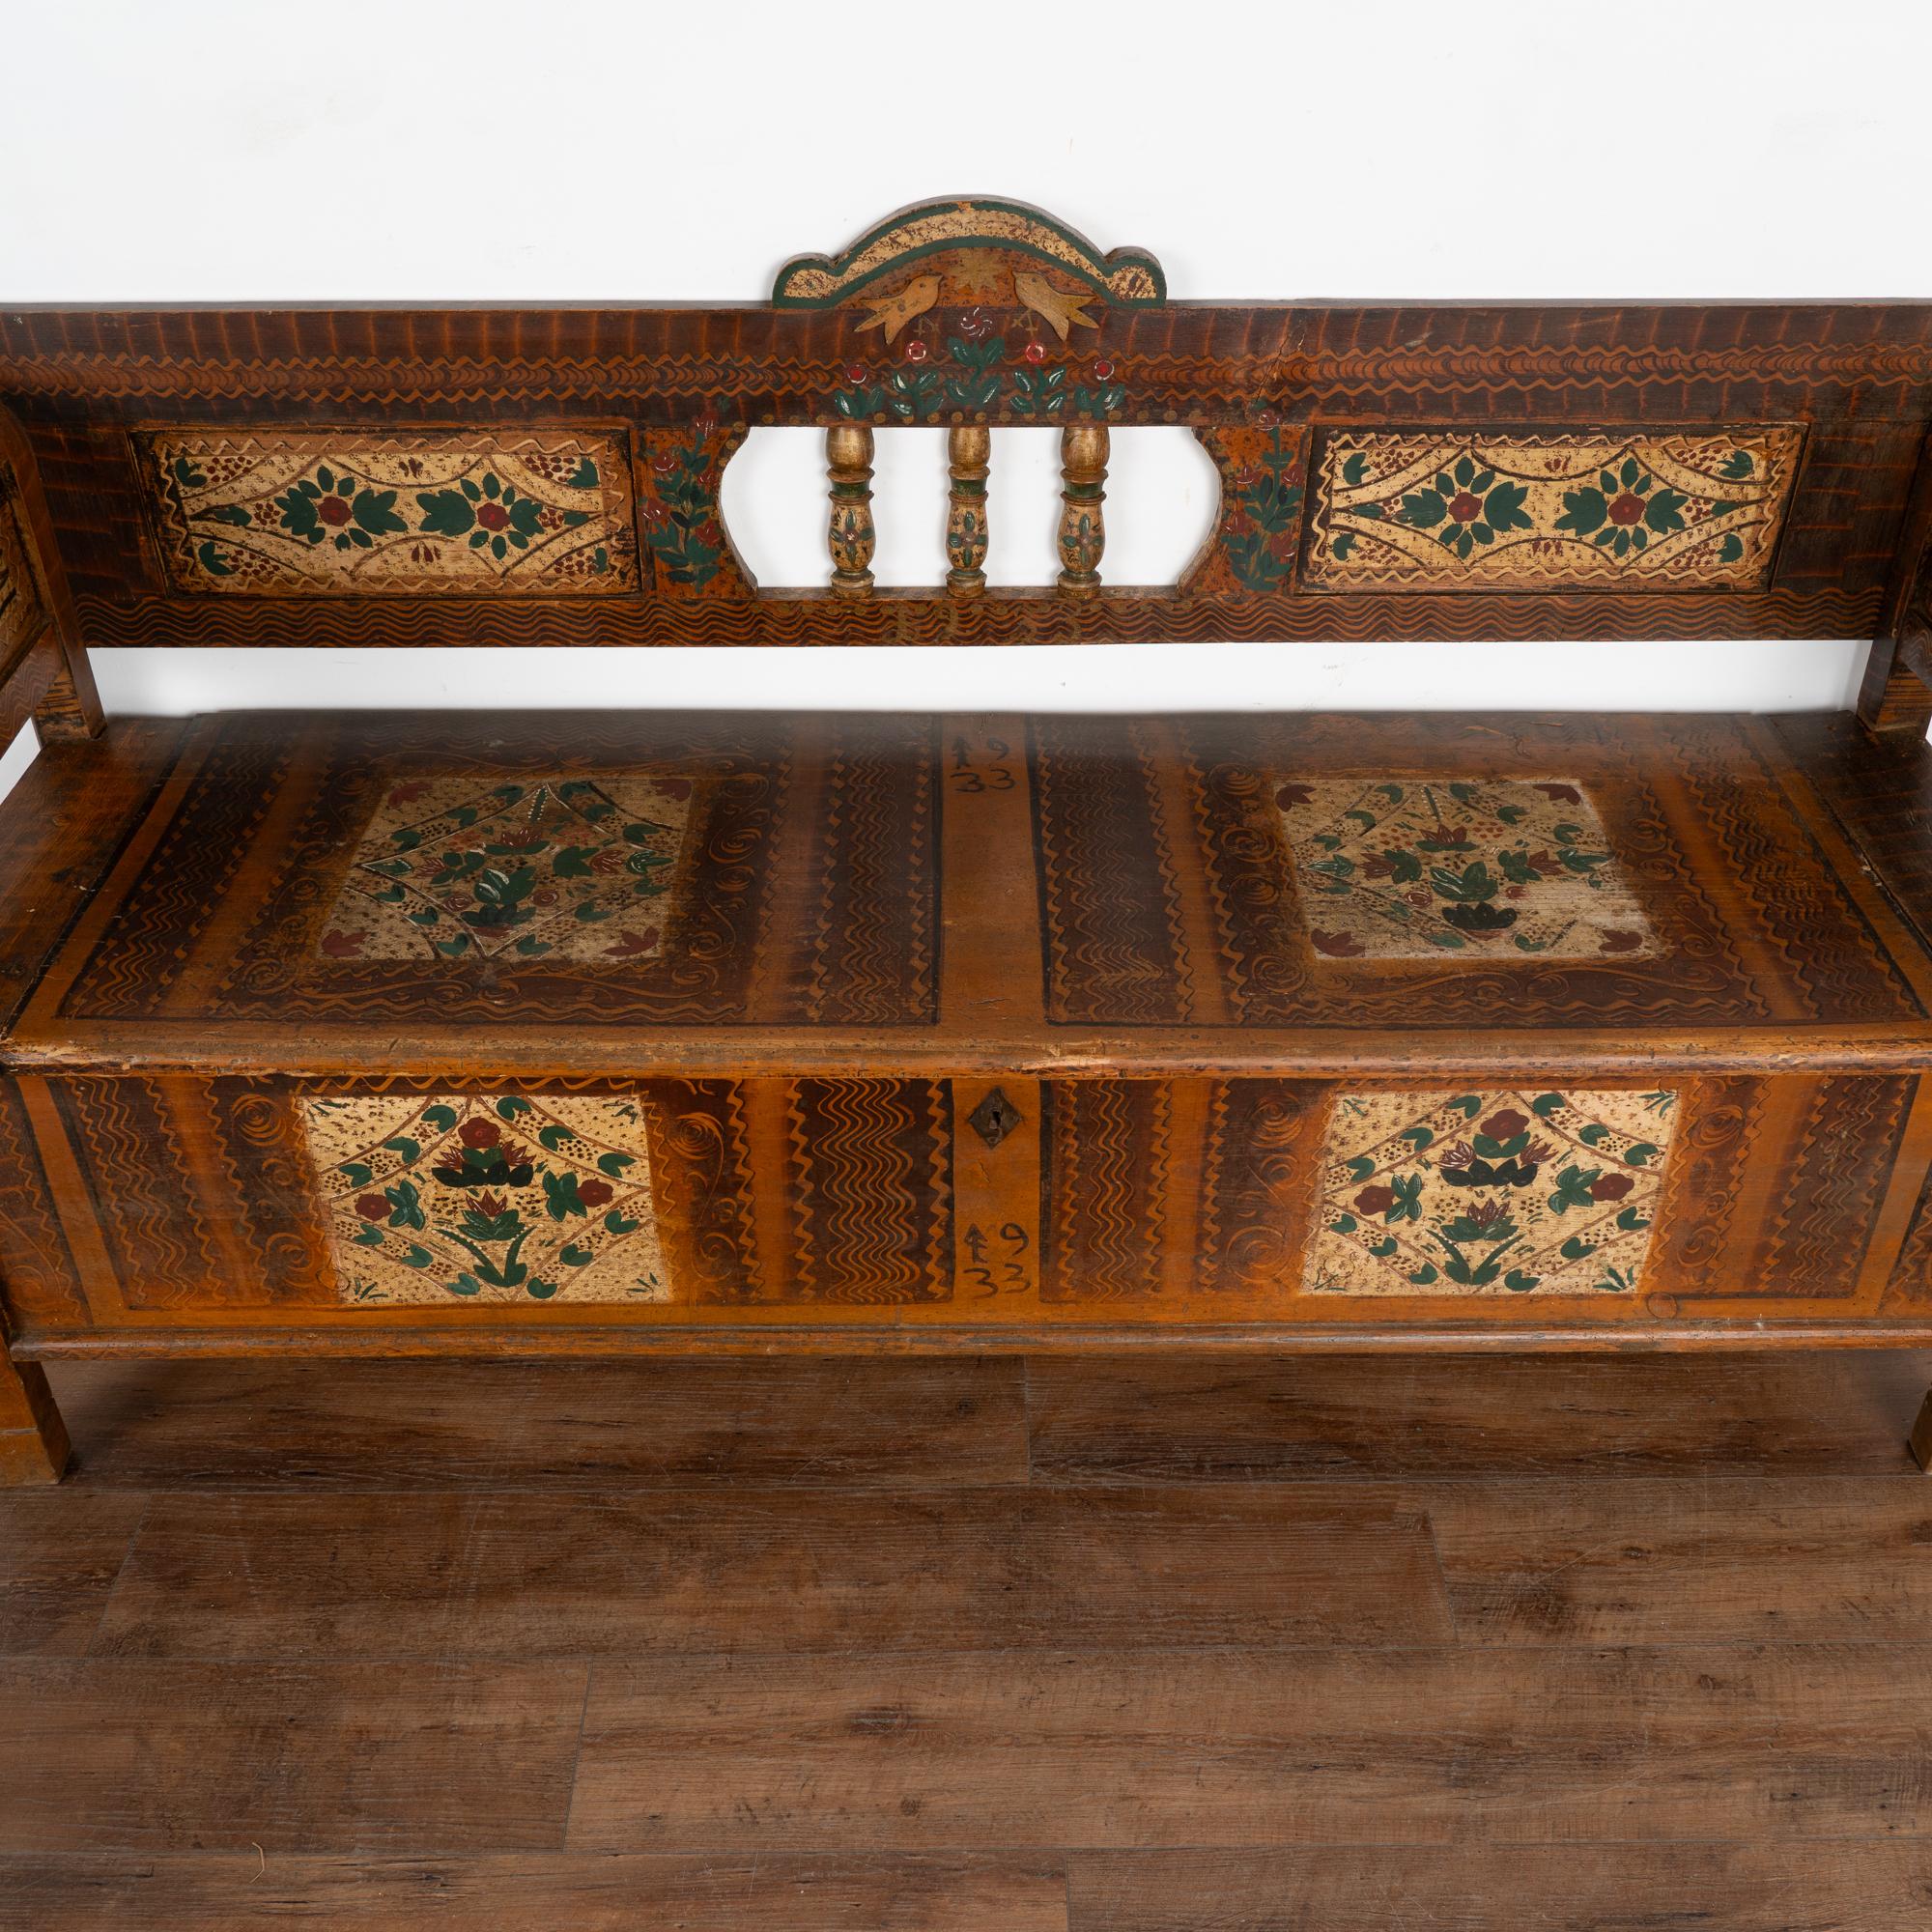 20th Century Original Painted Folk Art Bench With Carved Birds, Hungary dated 1933 For Sale